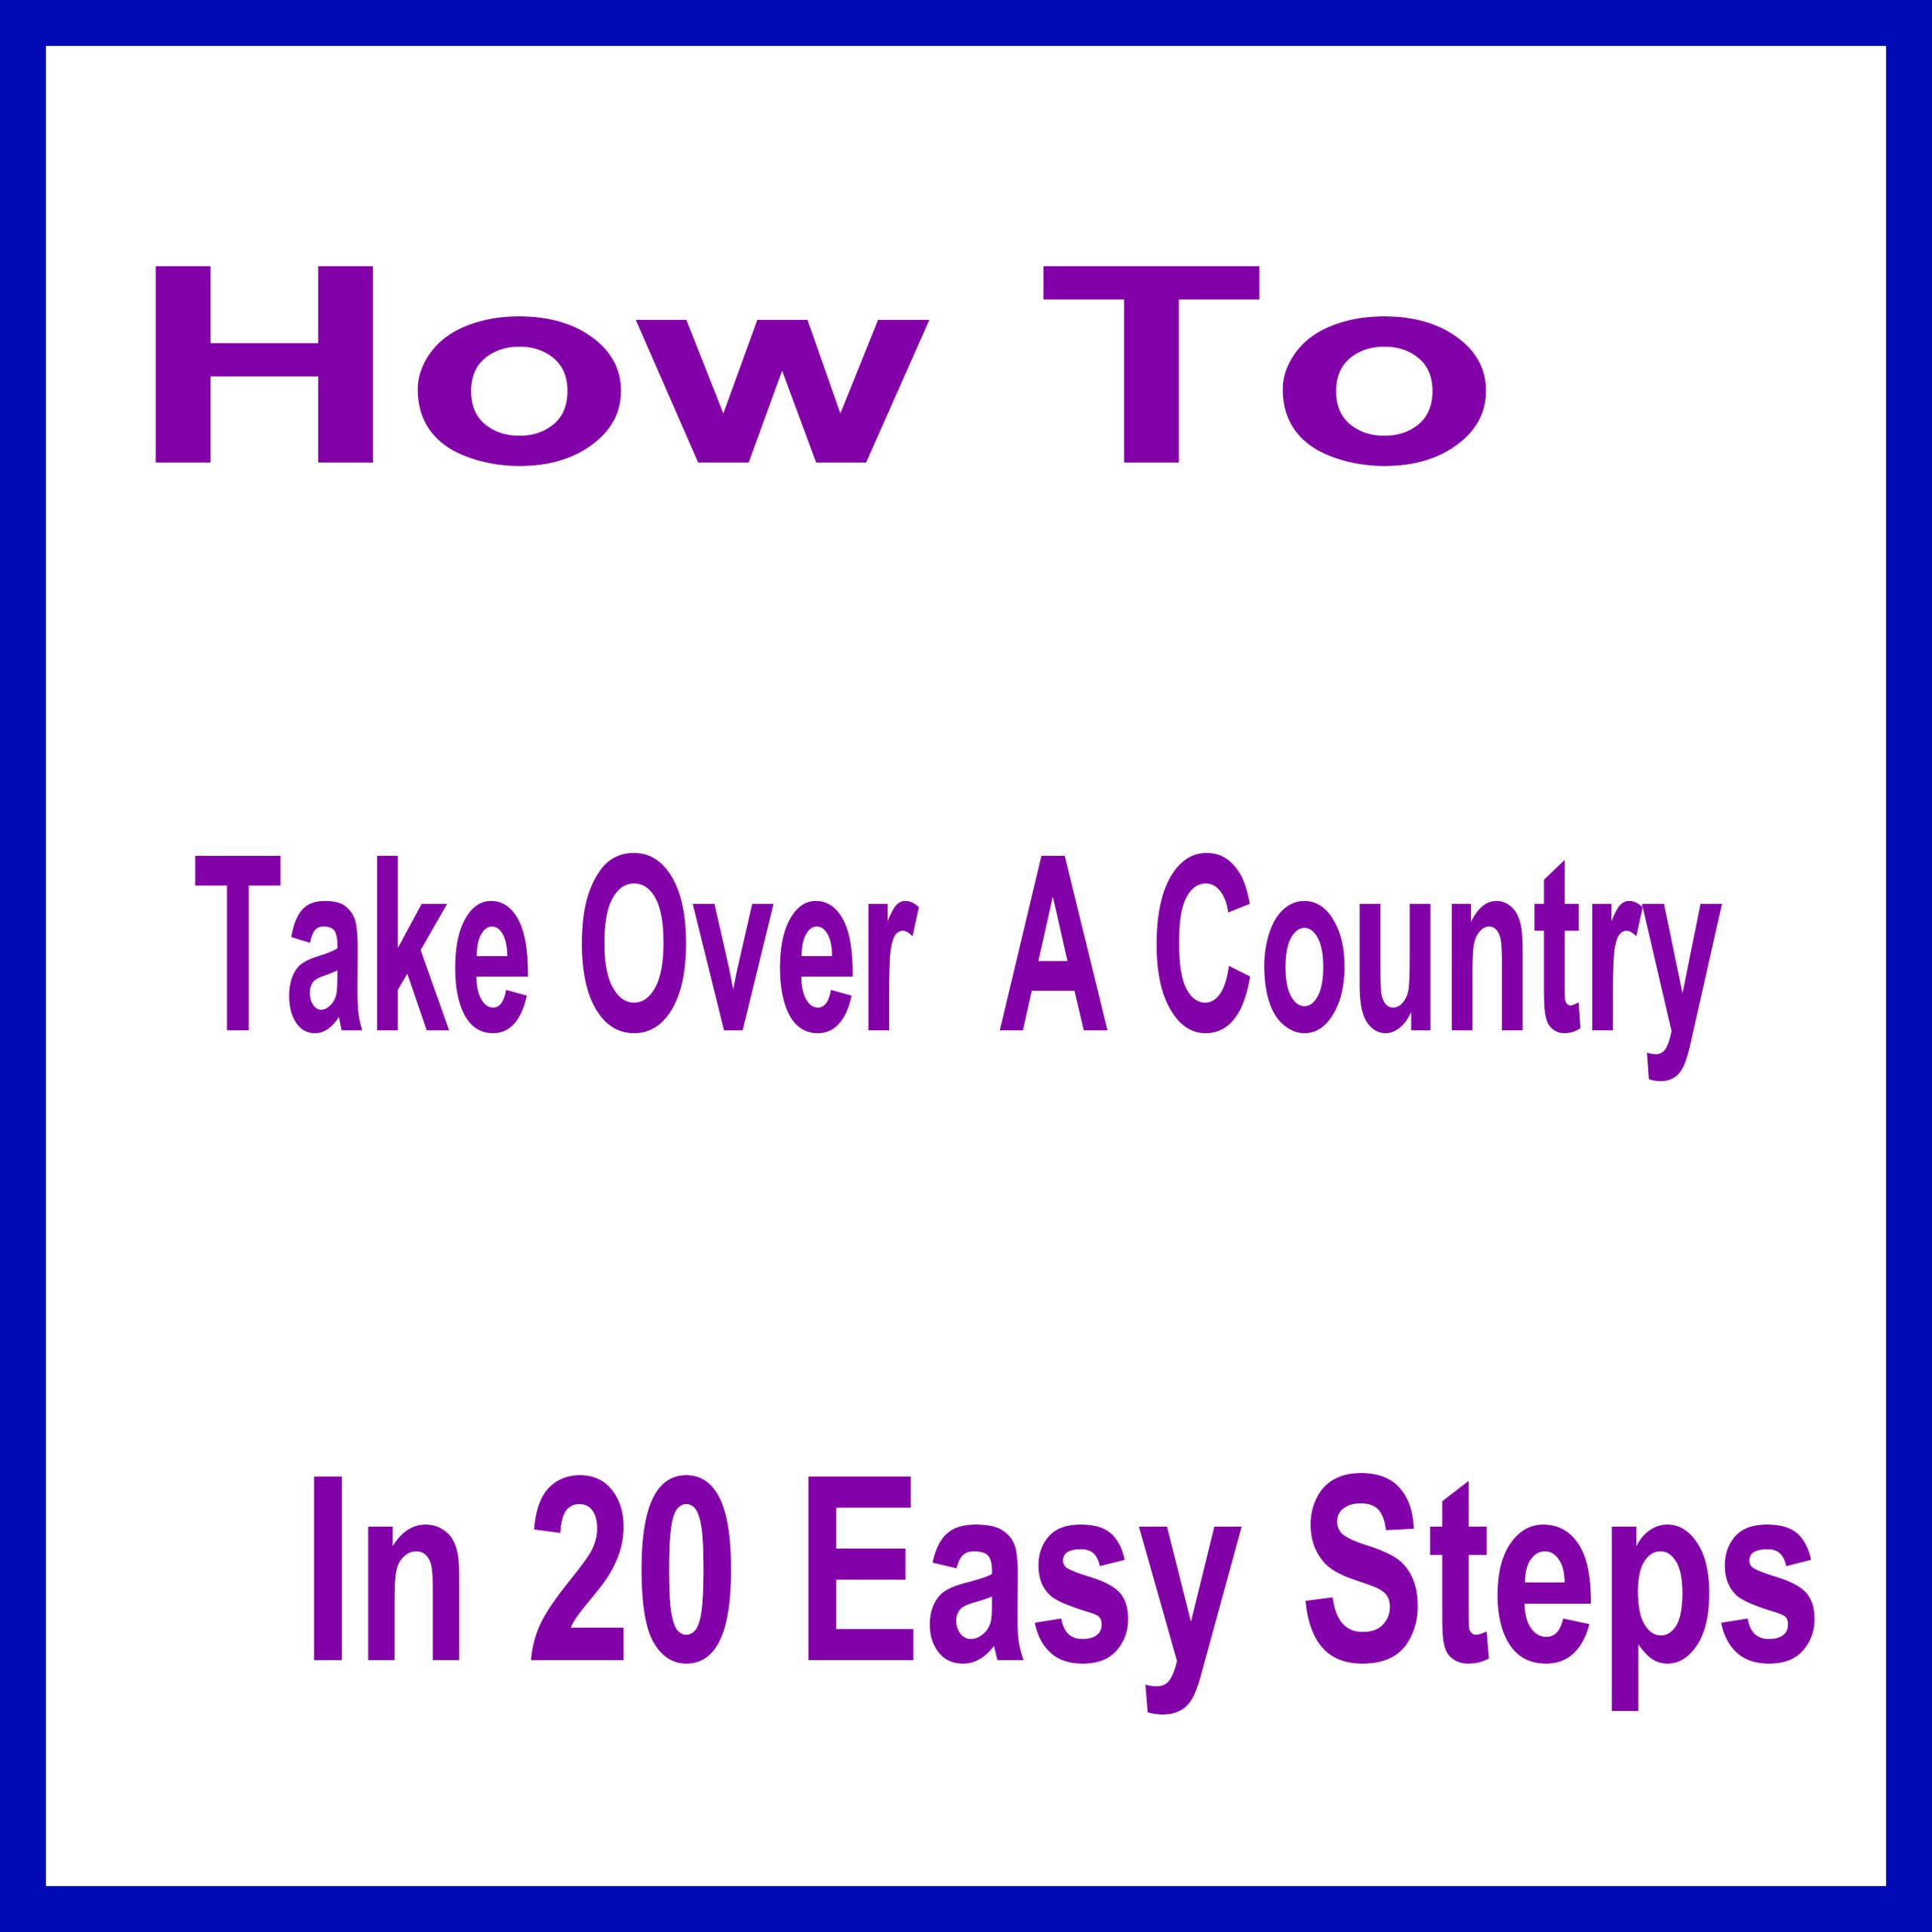 How to take over a country in 20 easy steps